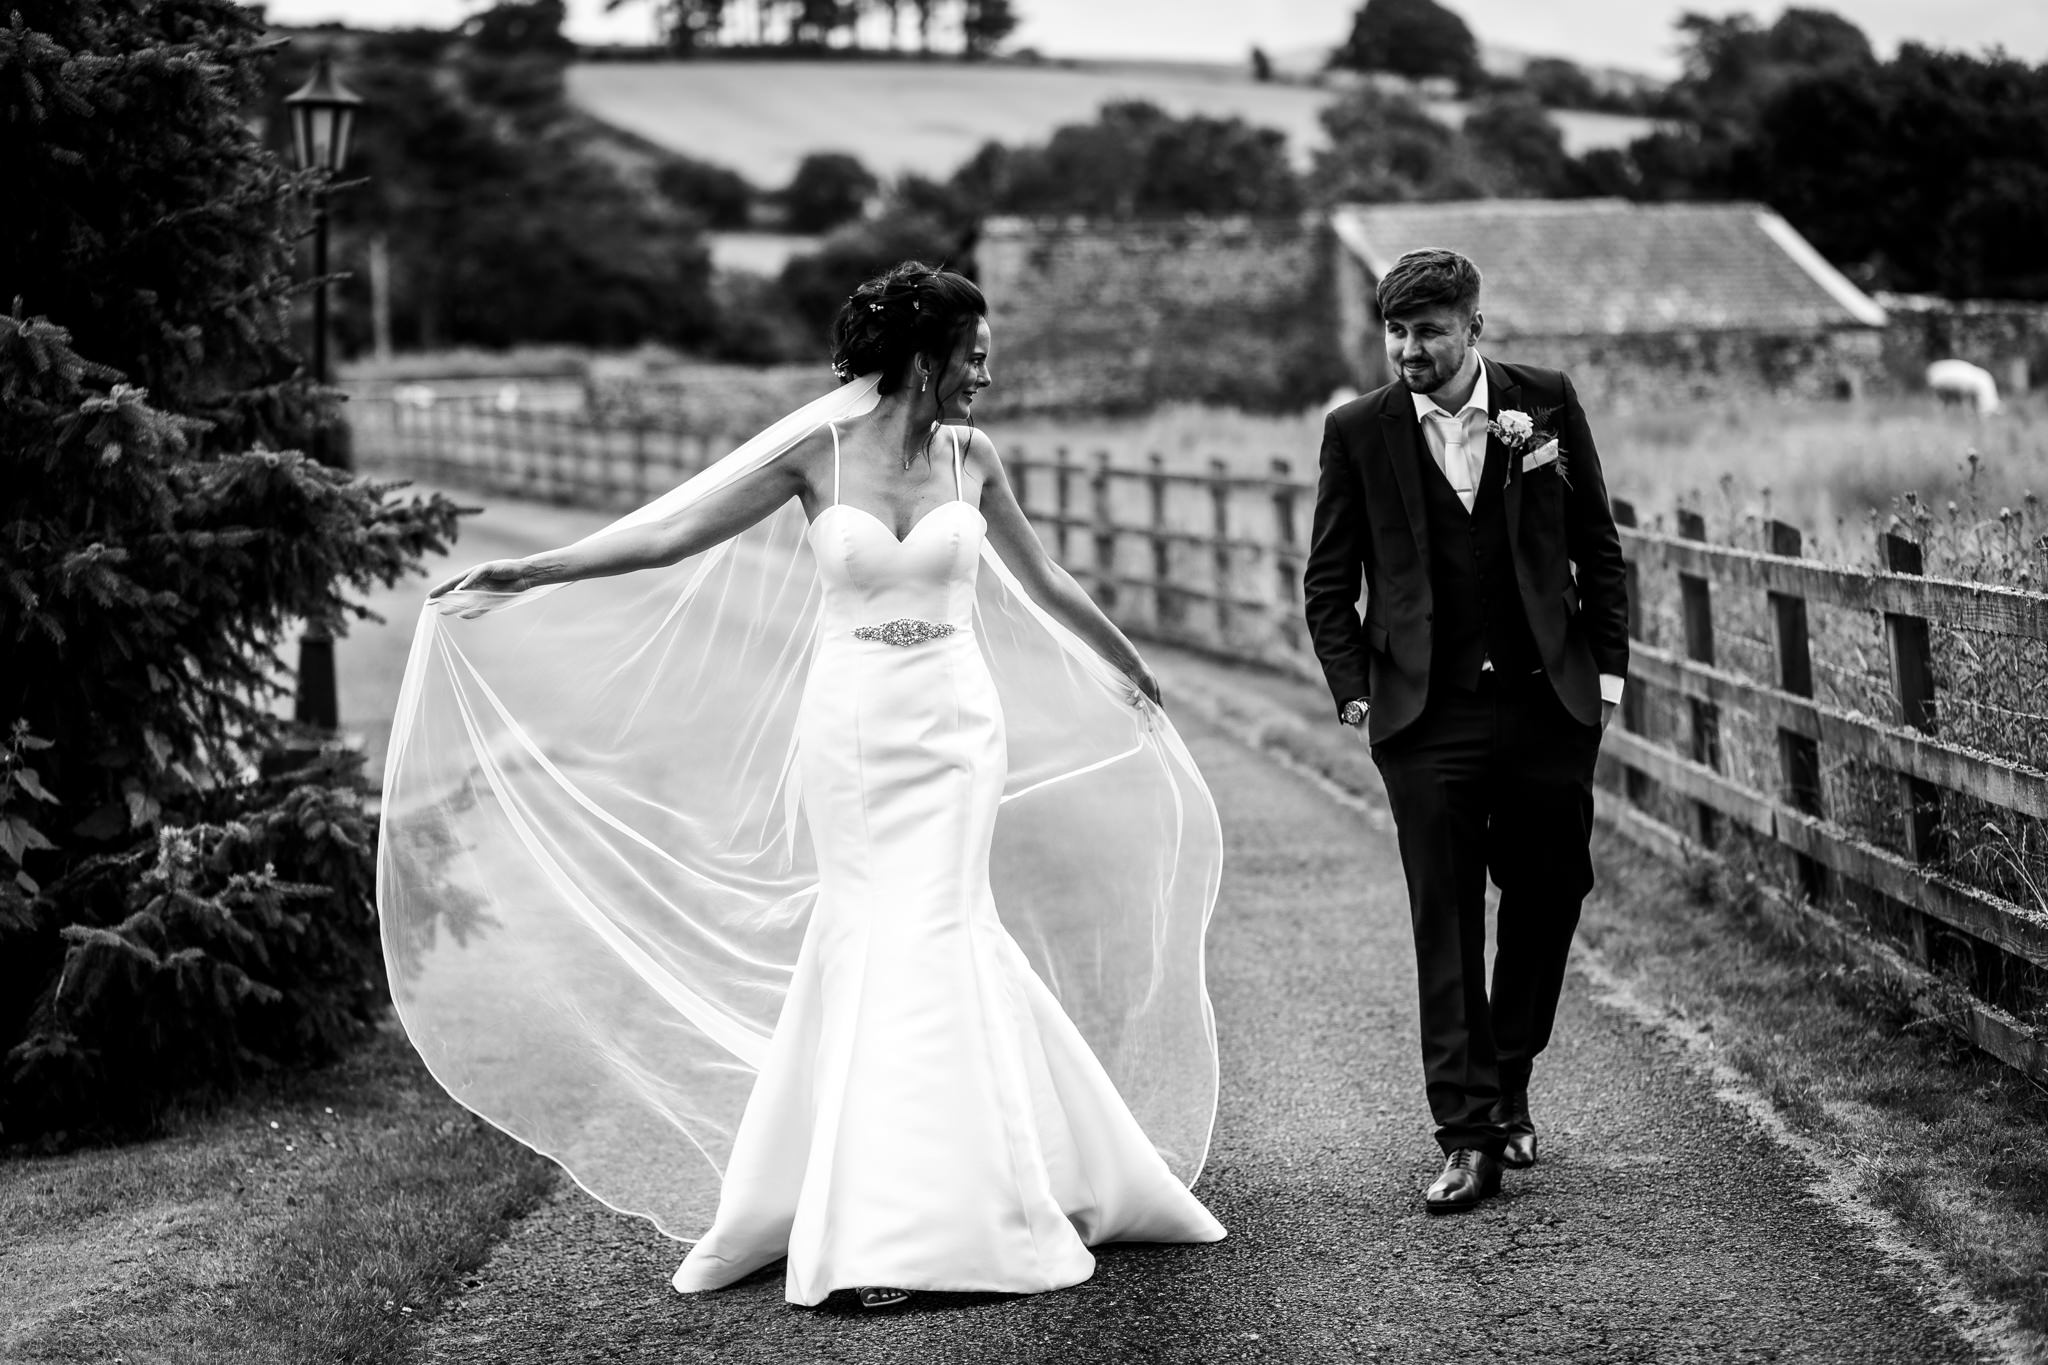 Peterstone Court Wedding - Bride and Groom - Art by Design Photography